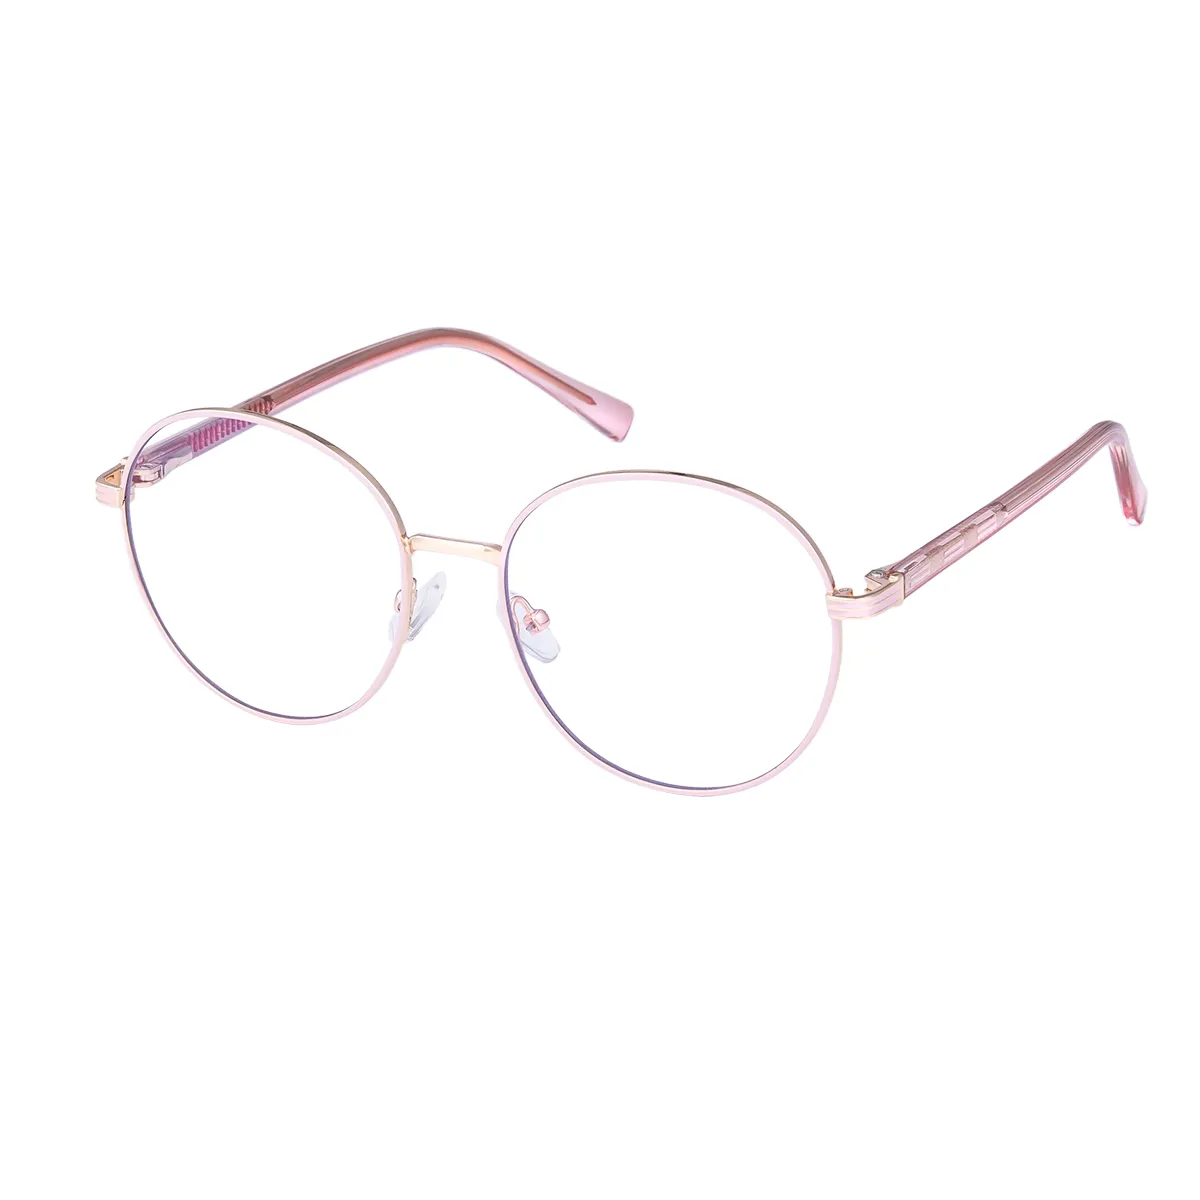 Tammy - Round Rose Gold Glasses for Women